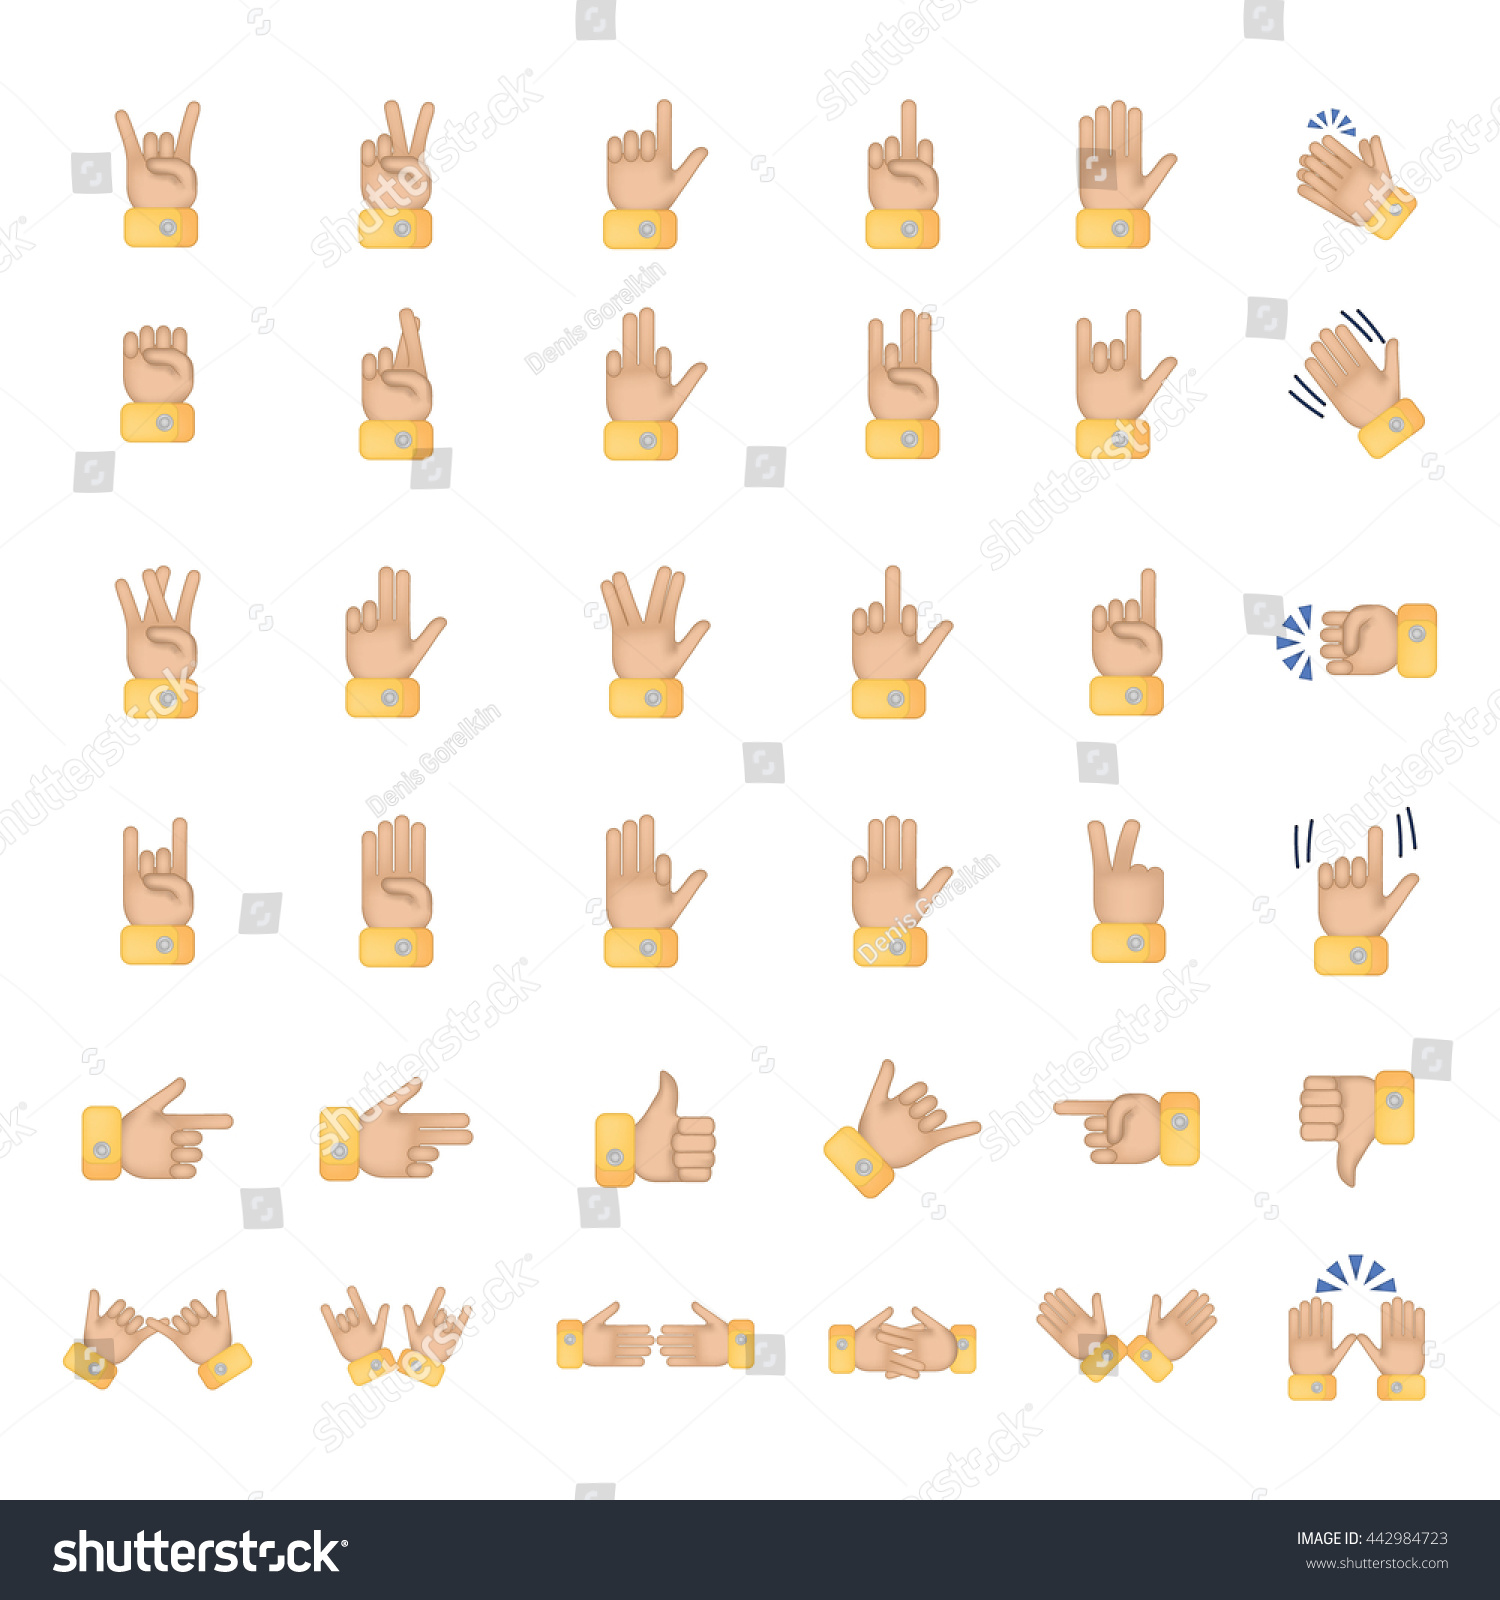 Set Hand Emoticon Vector Isolated On Stock Vector 442984723 - Shutterstock